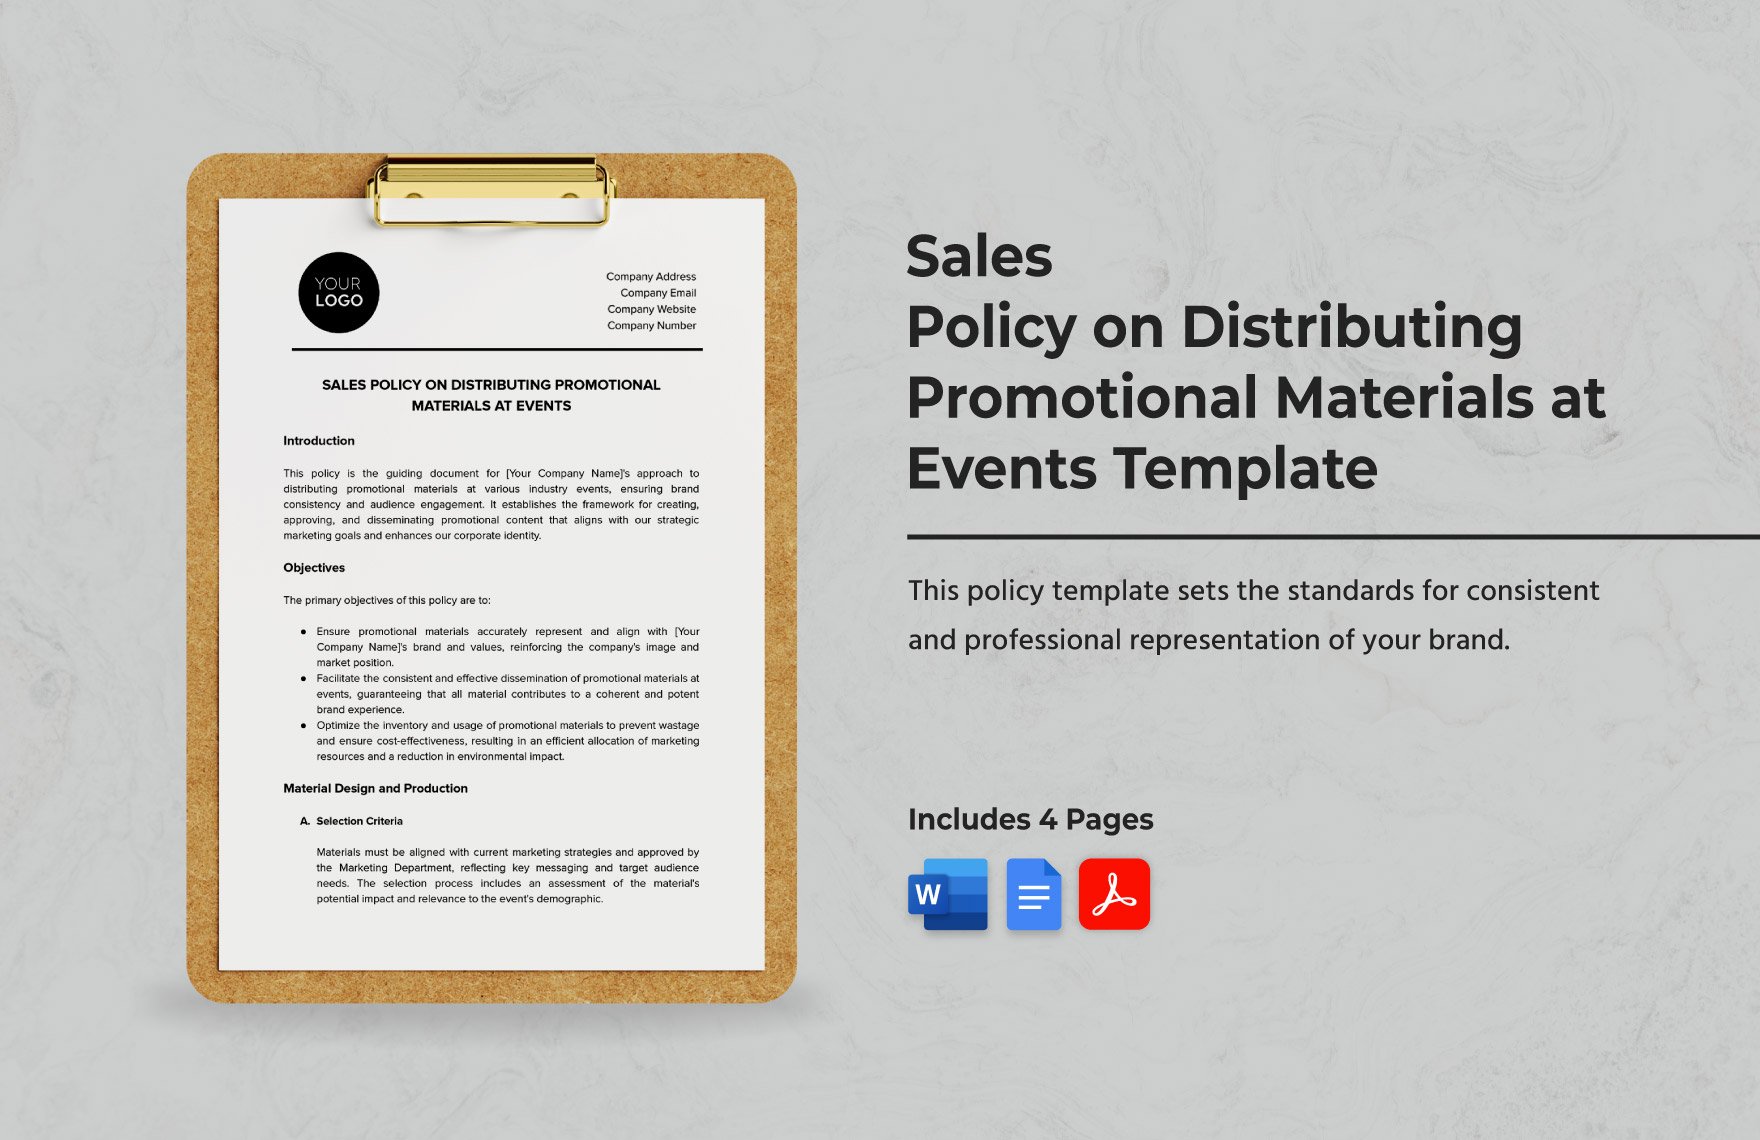 Sales Policy on Distributing Promotional Materials at Events Template